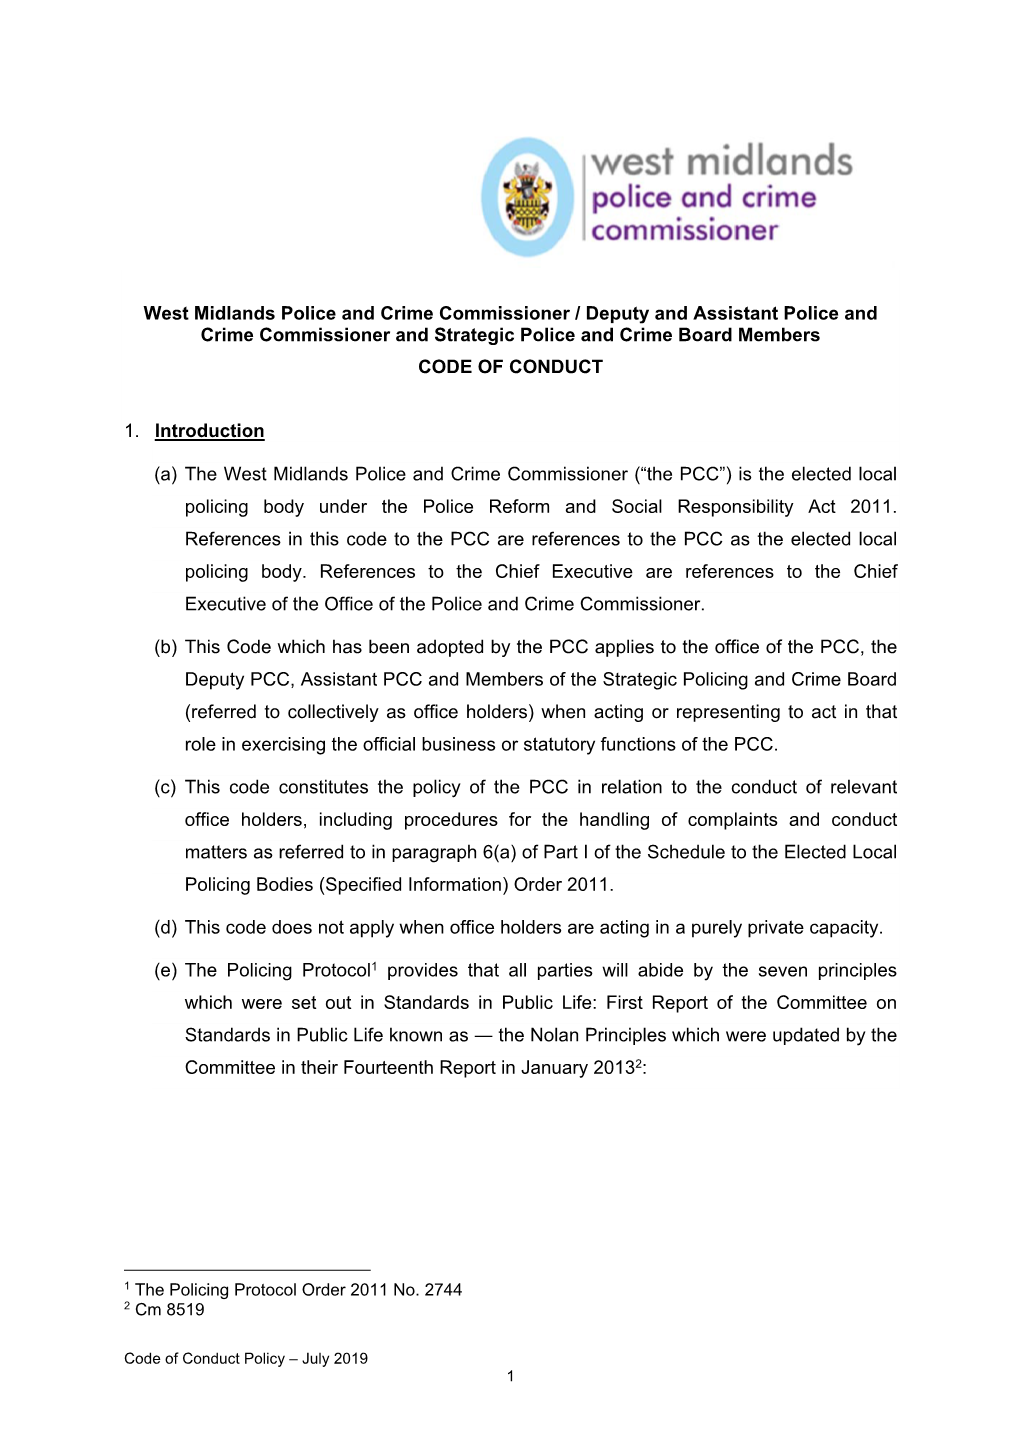 Code of Conduct Policy July 2019